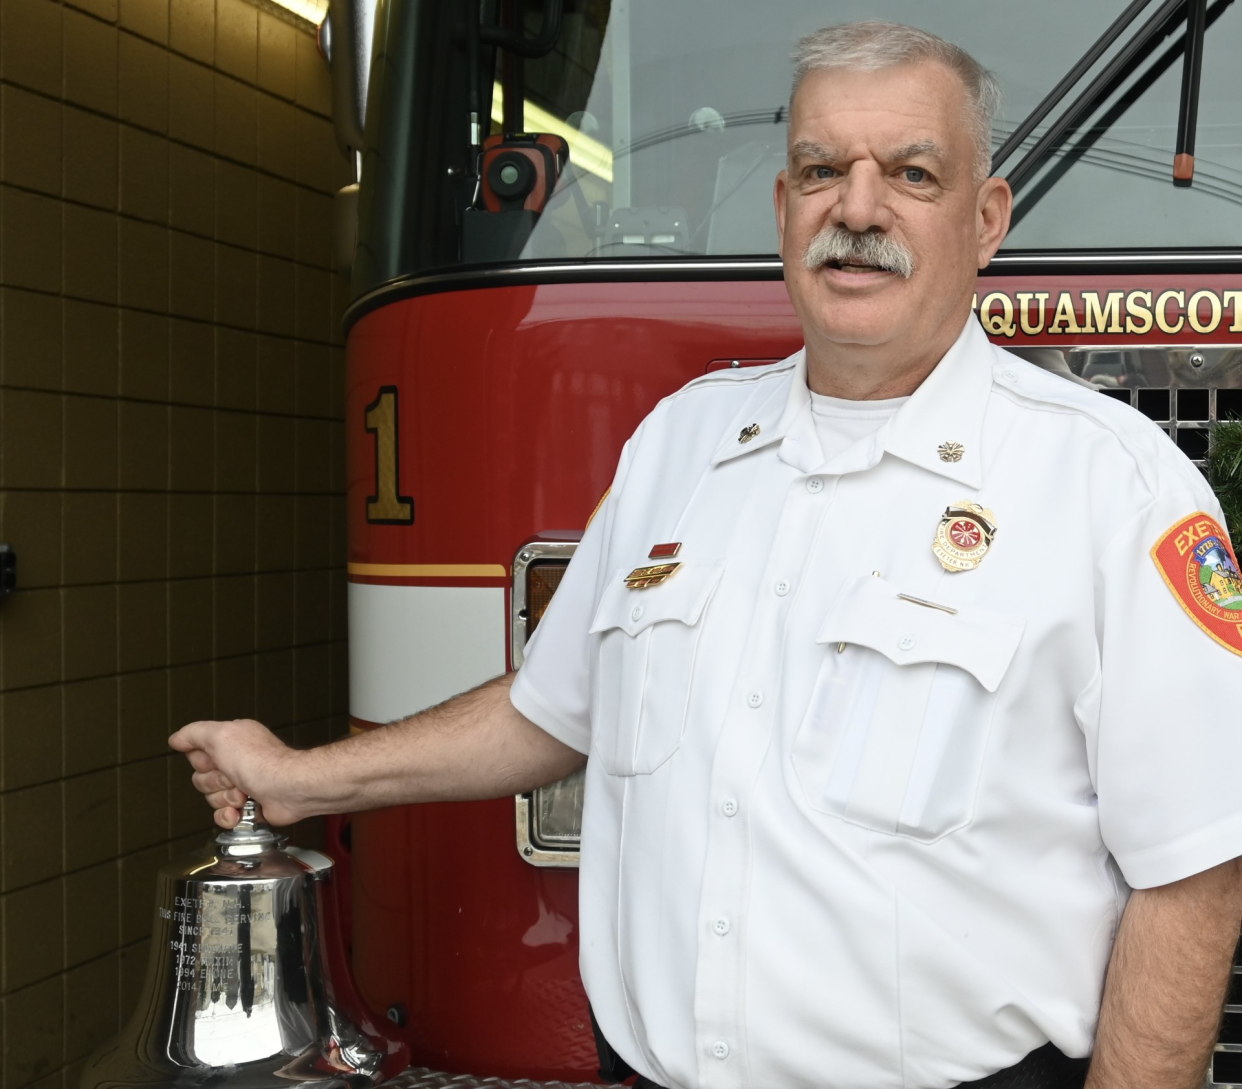 Exeter Fire Chief Eric Wilking is retiring April 19, marking the end of his 42-year career in fire service.